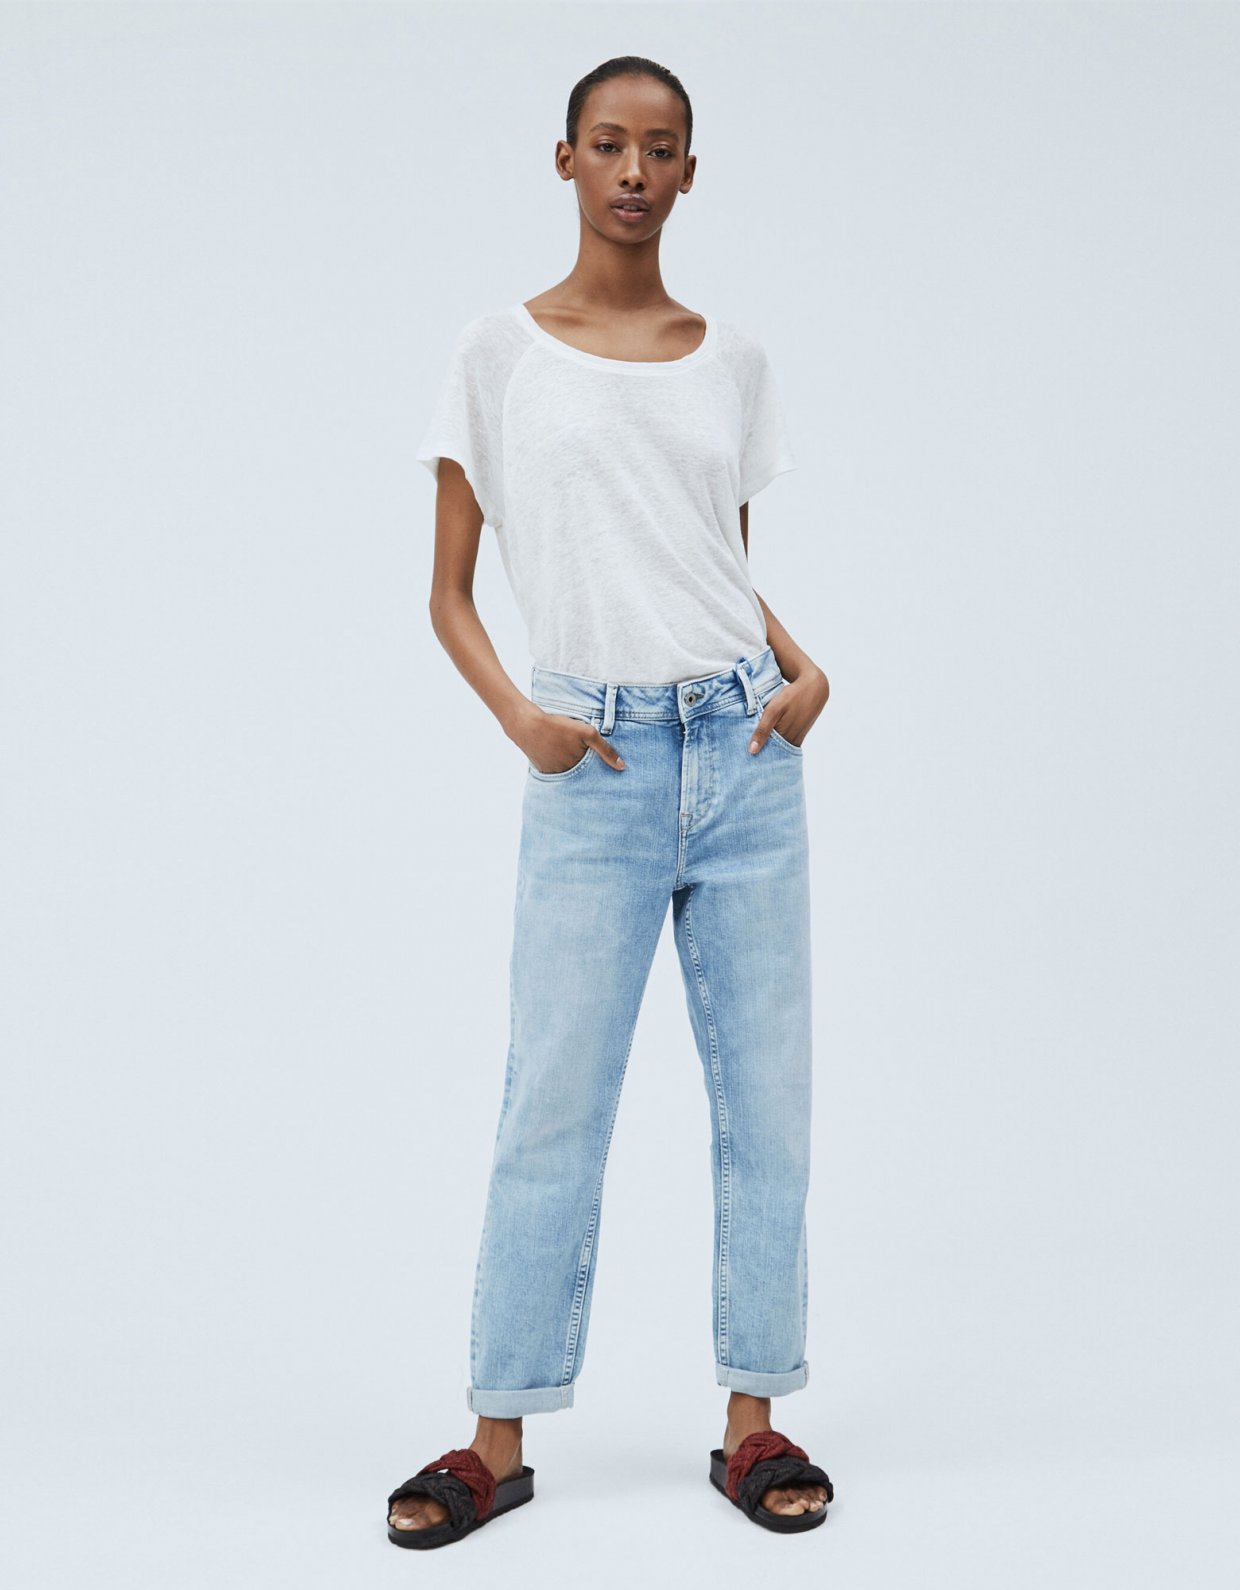 Pepe Jeans Violet carrot fit high-waist jeans